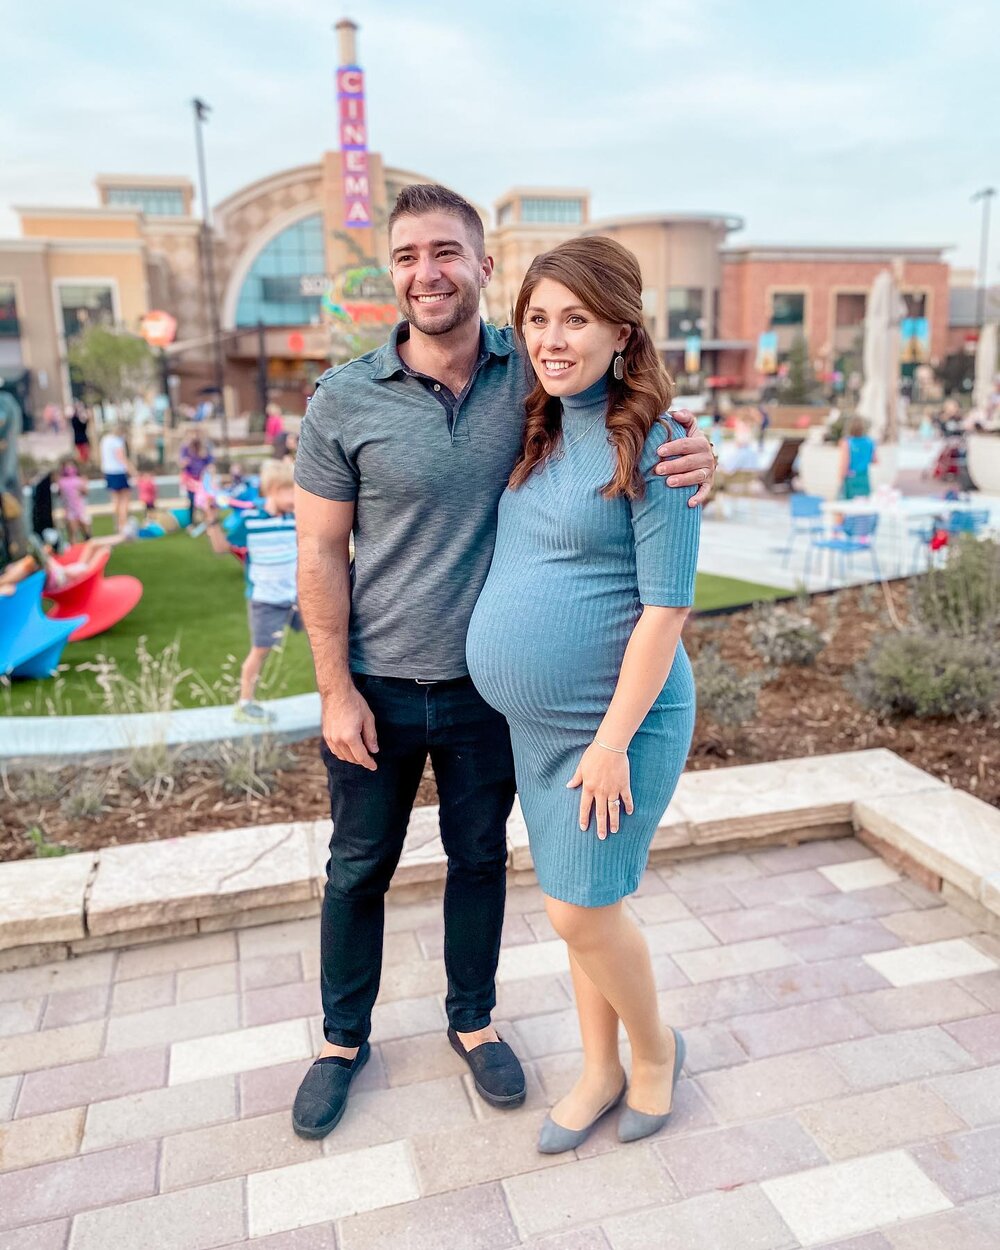 About to pop! Time to get all the date nights and quality time in before we enter the newborn baby season again! 
We had the best time this weekend at the grand reopening of @shopsouthlands ! They seriously have the best shopping, restaurants and fun